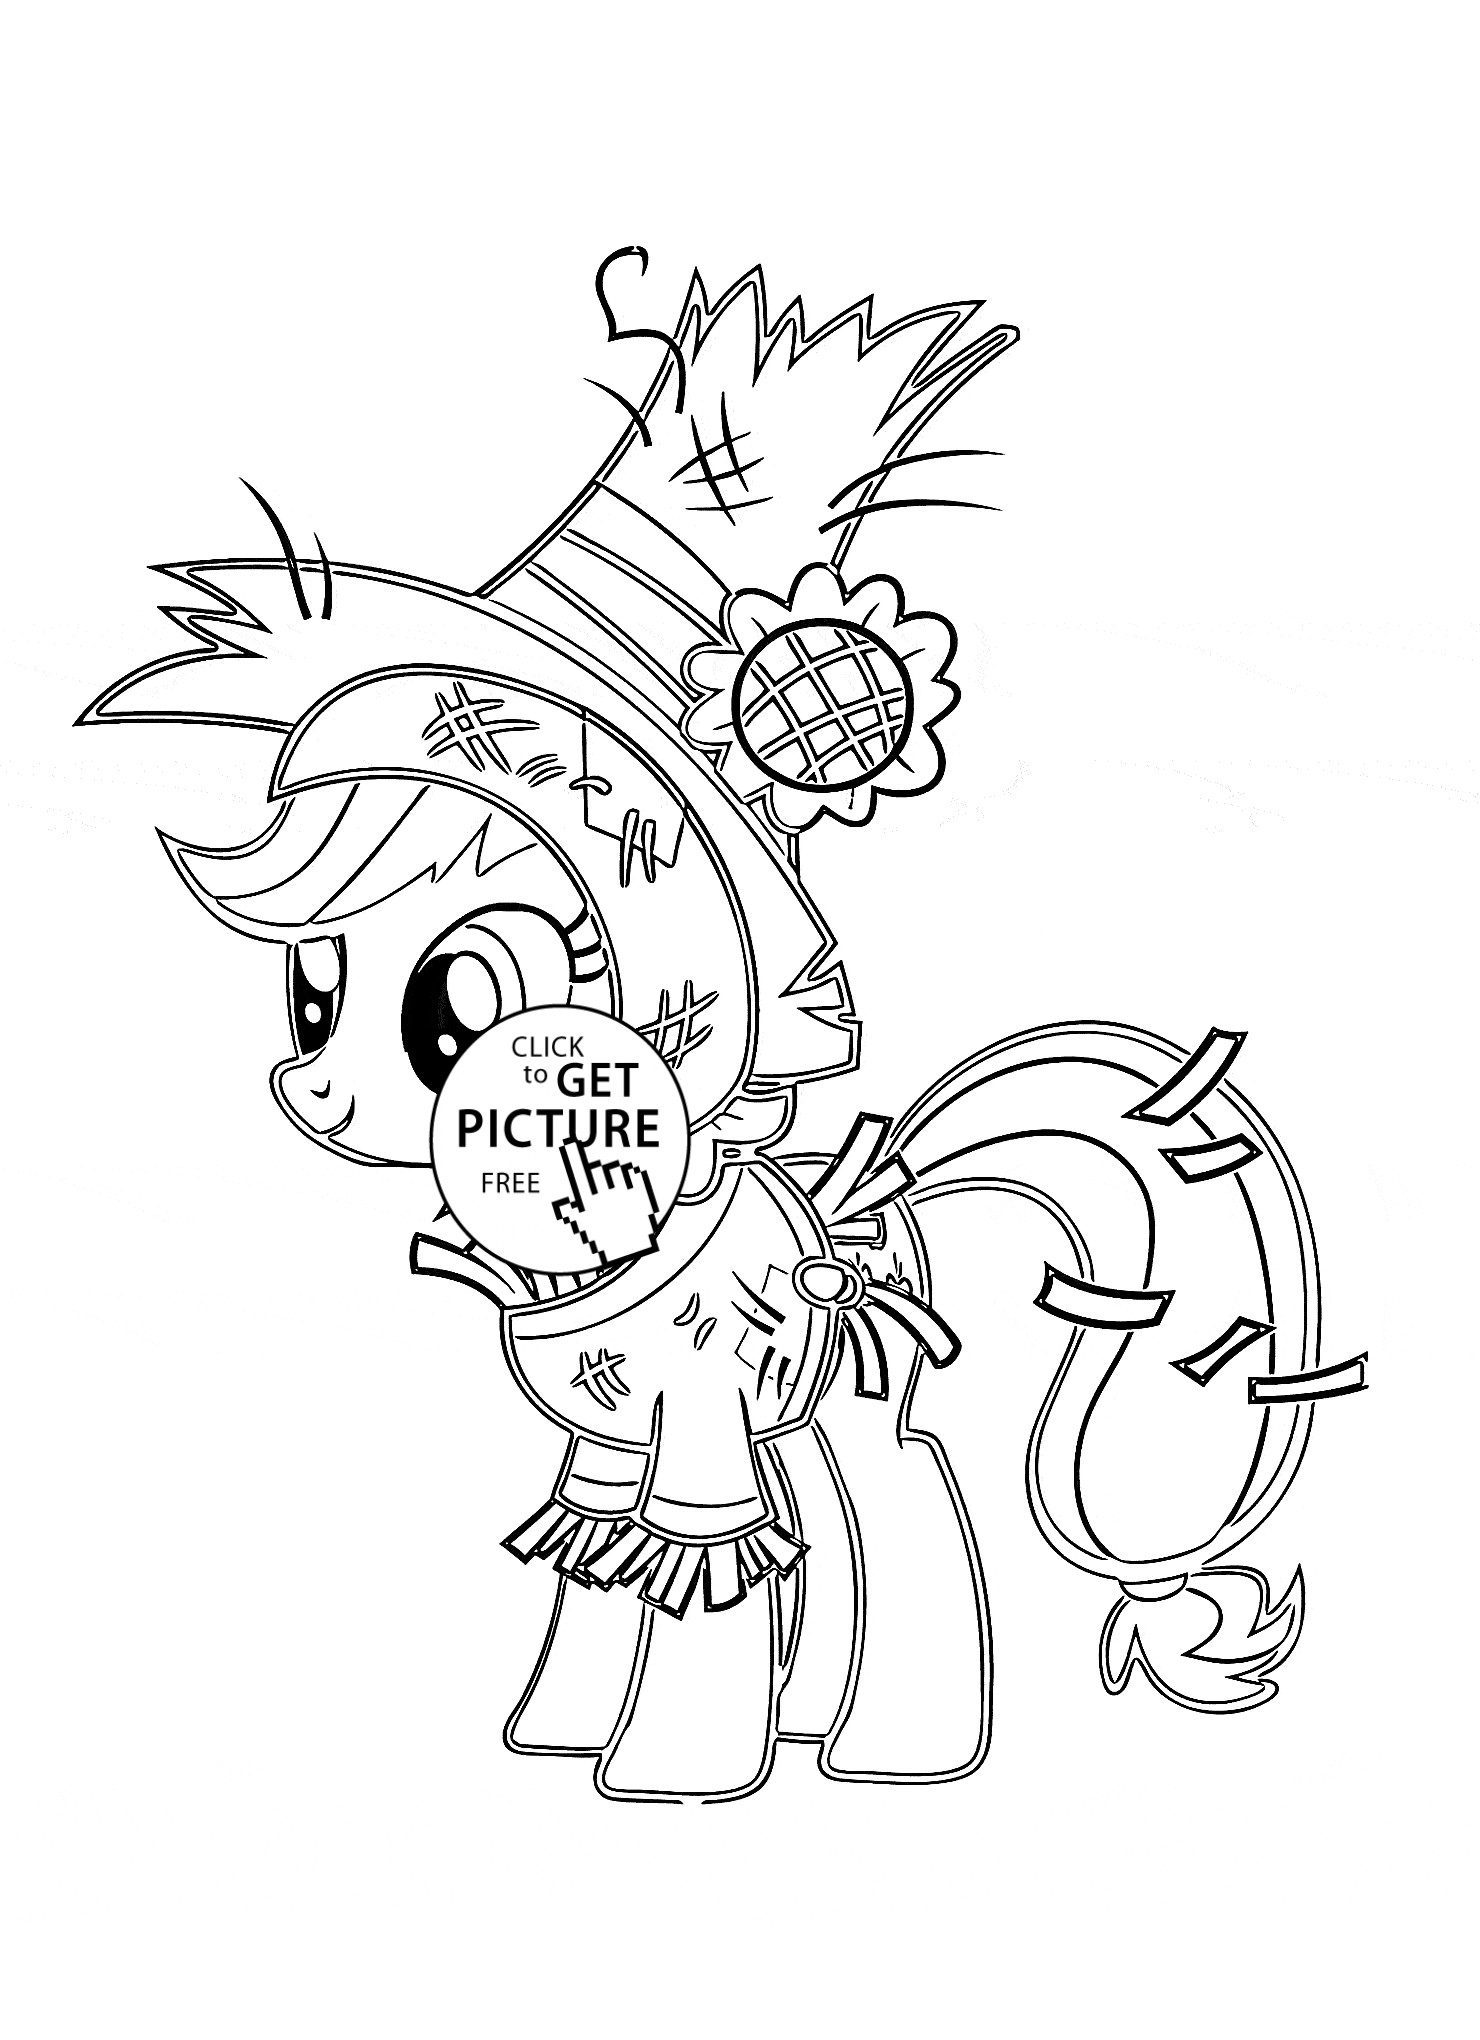 Halloween Coloring Pages For Girls
 My little pony Funny Applejack Pony Halloween coloring